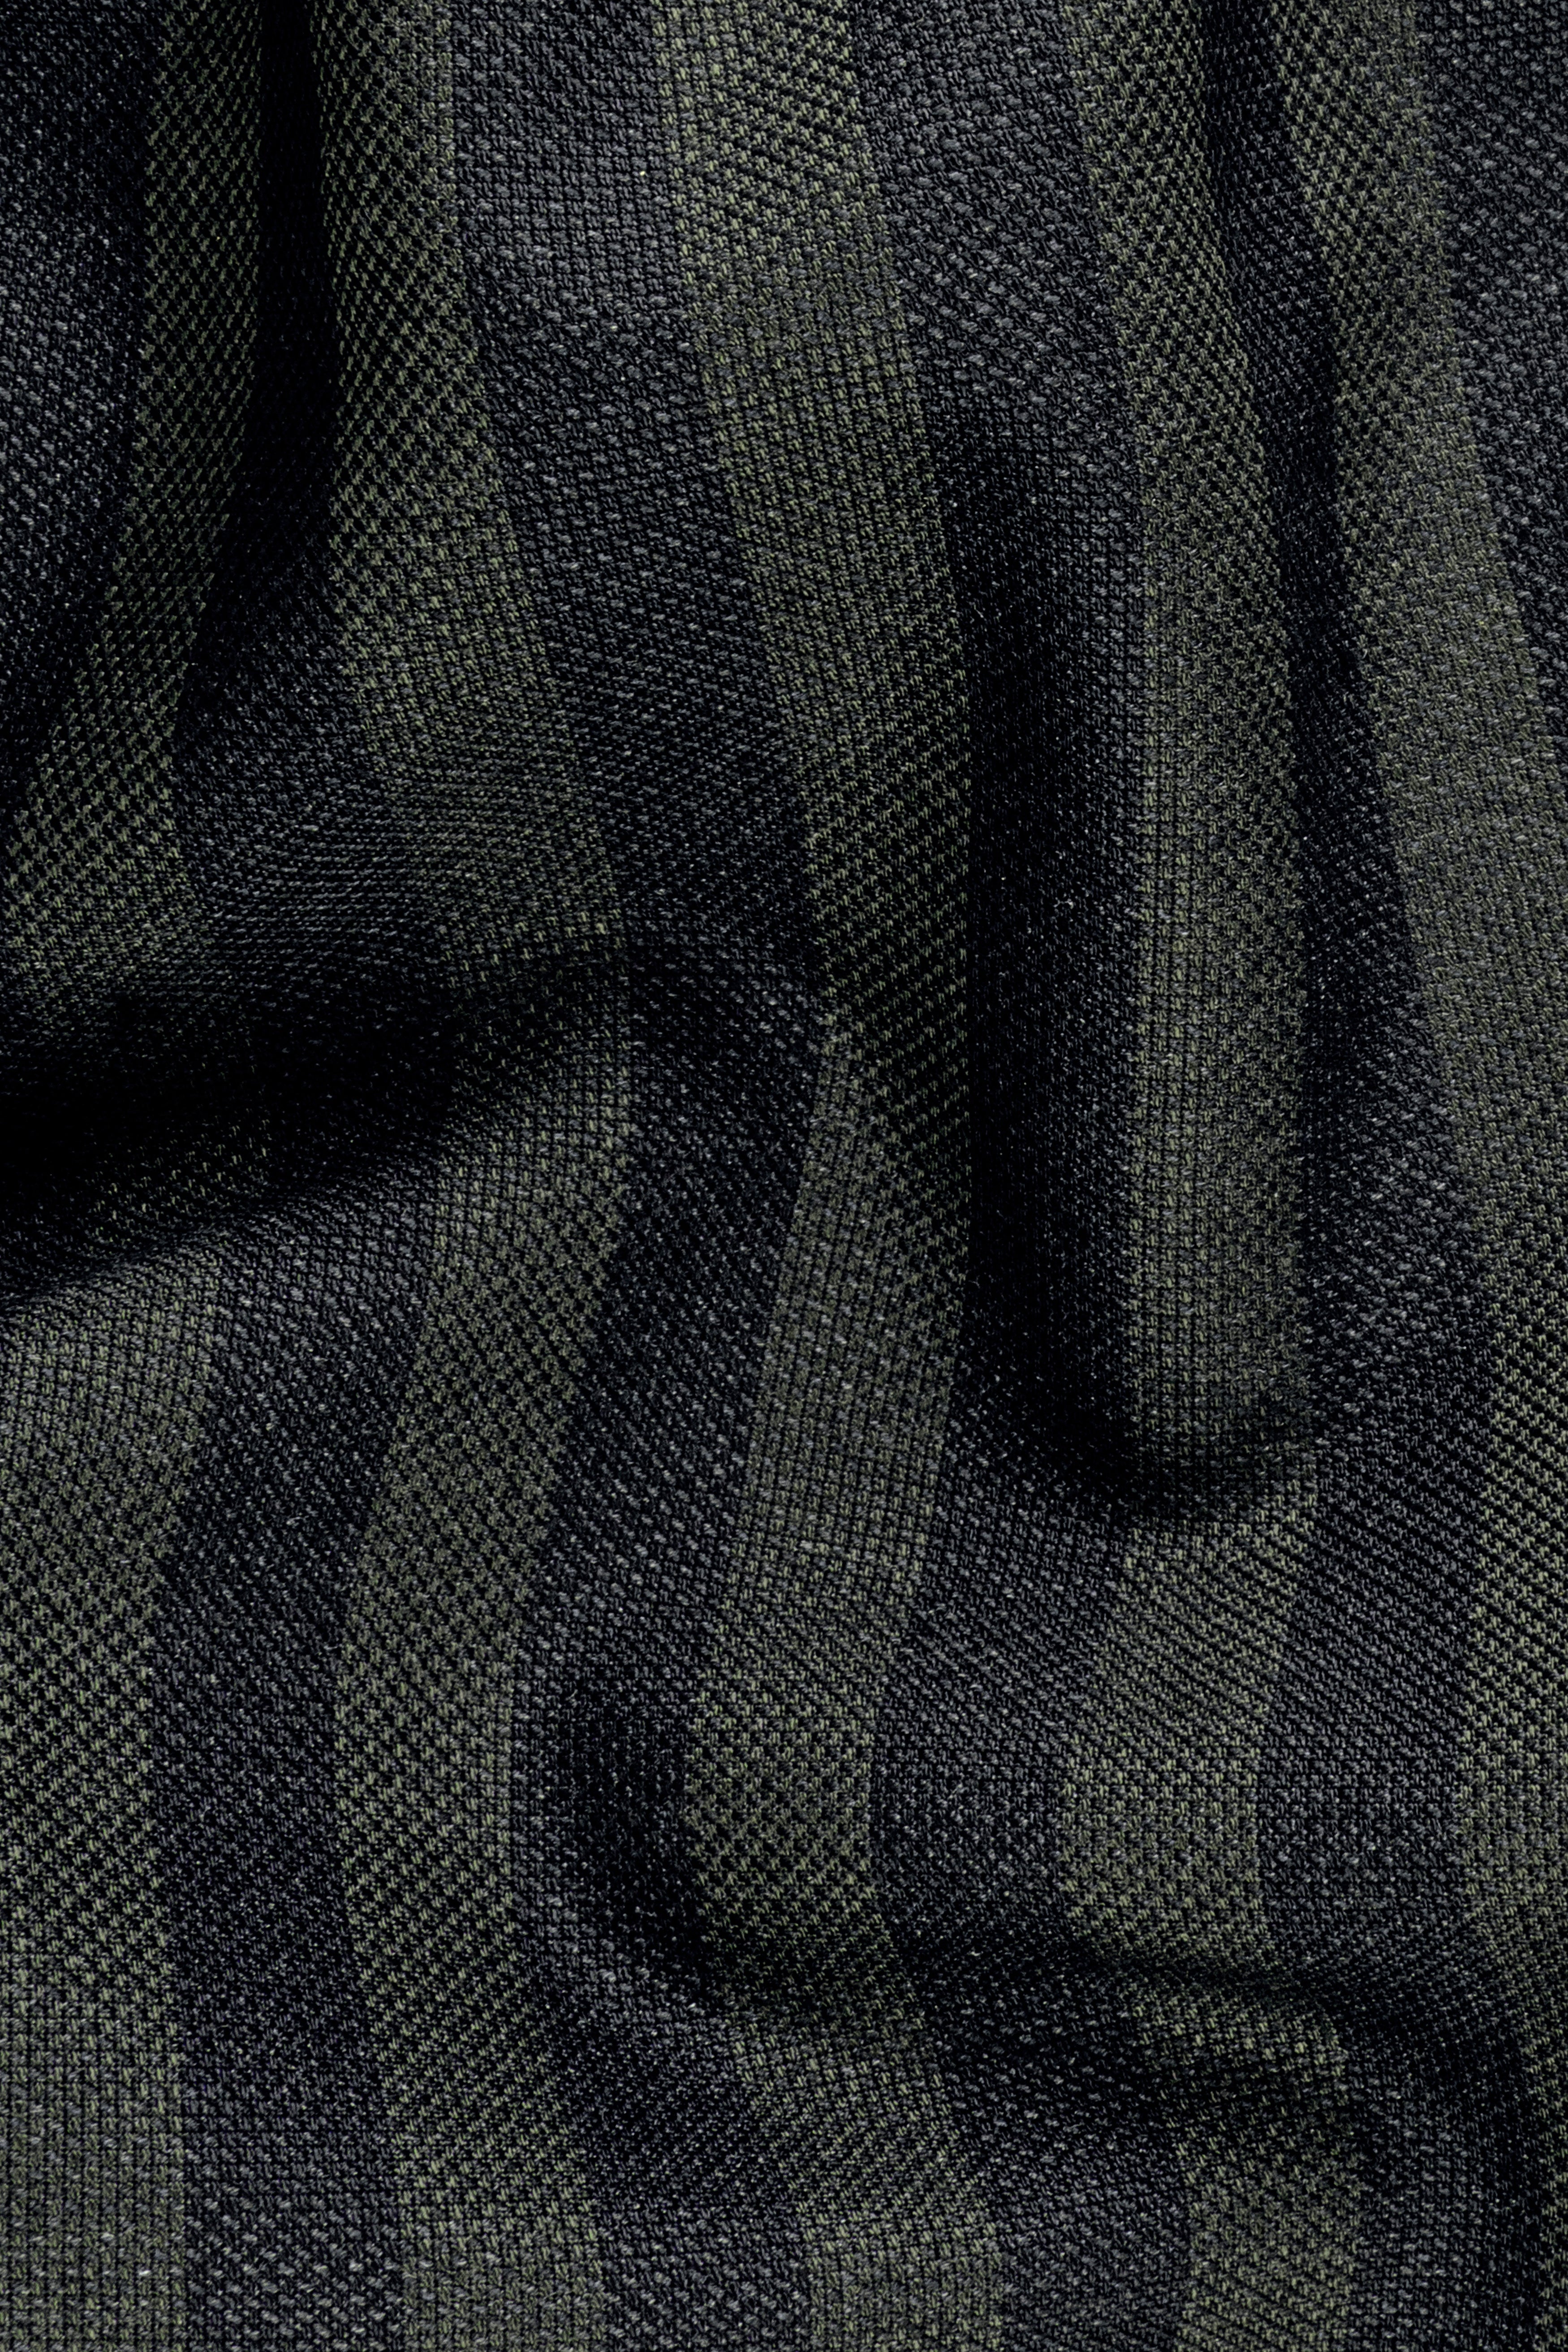 Heavy Green with Black Striped Wool Blend Suit